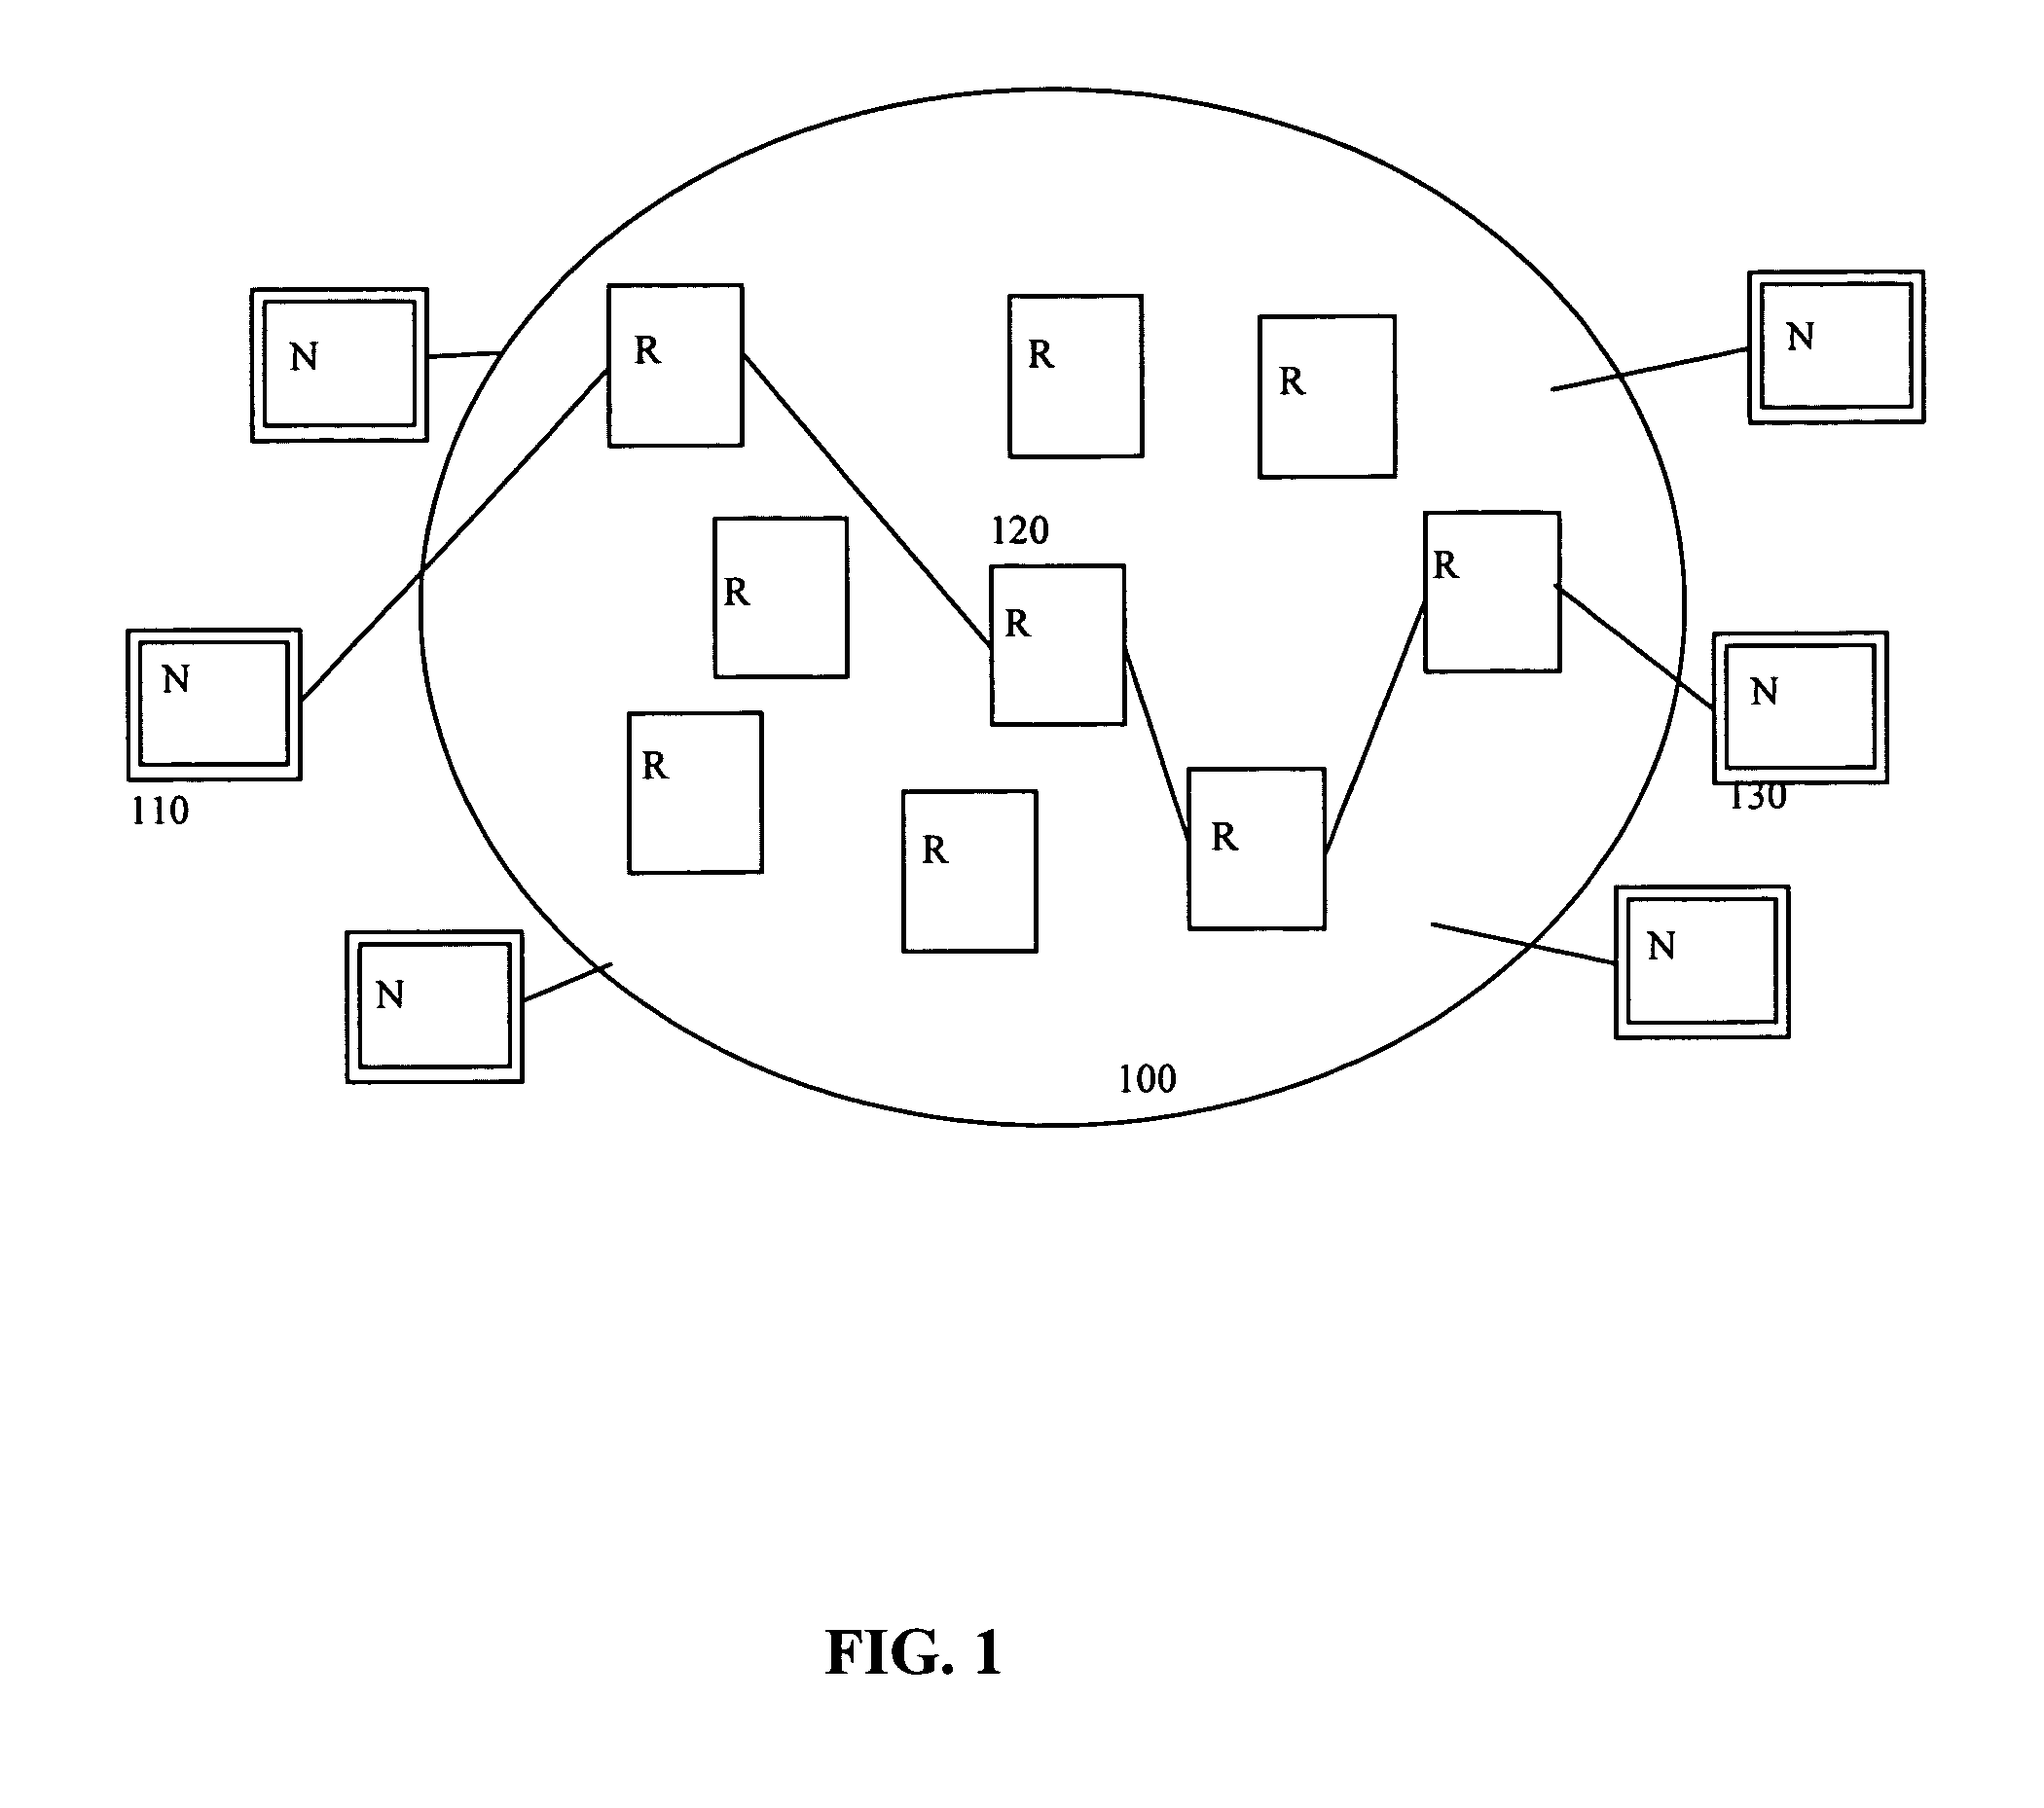 Method and apparatus for process flow random early discard in service aware networking systems